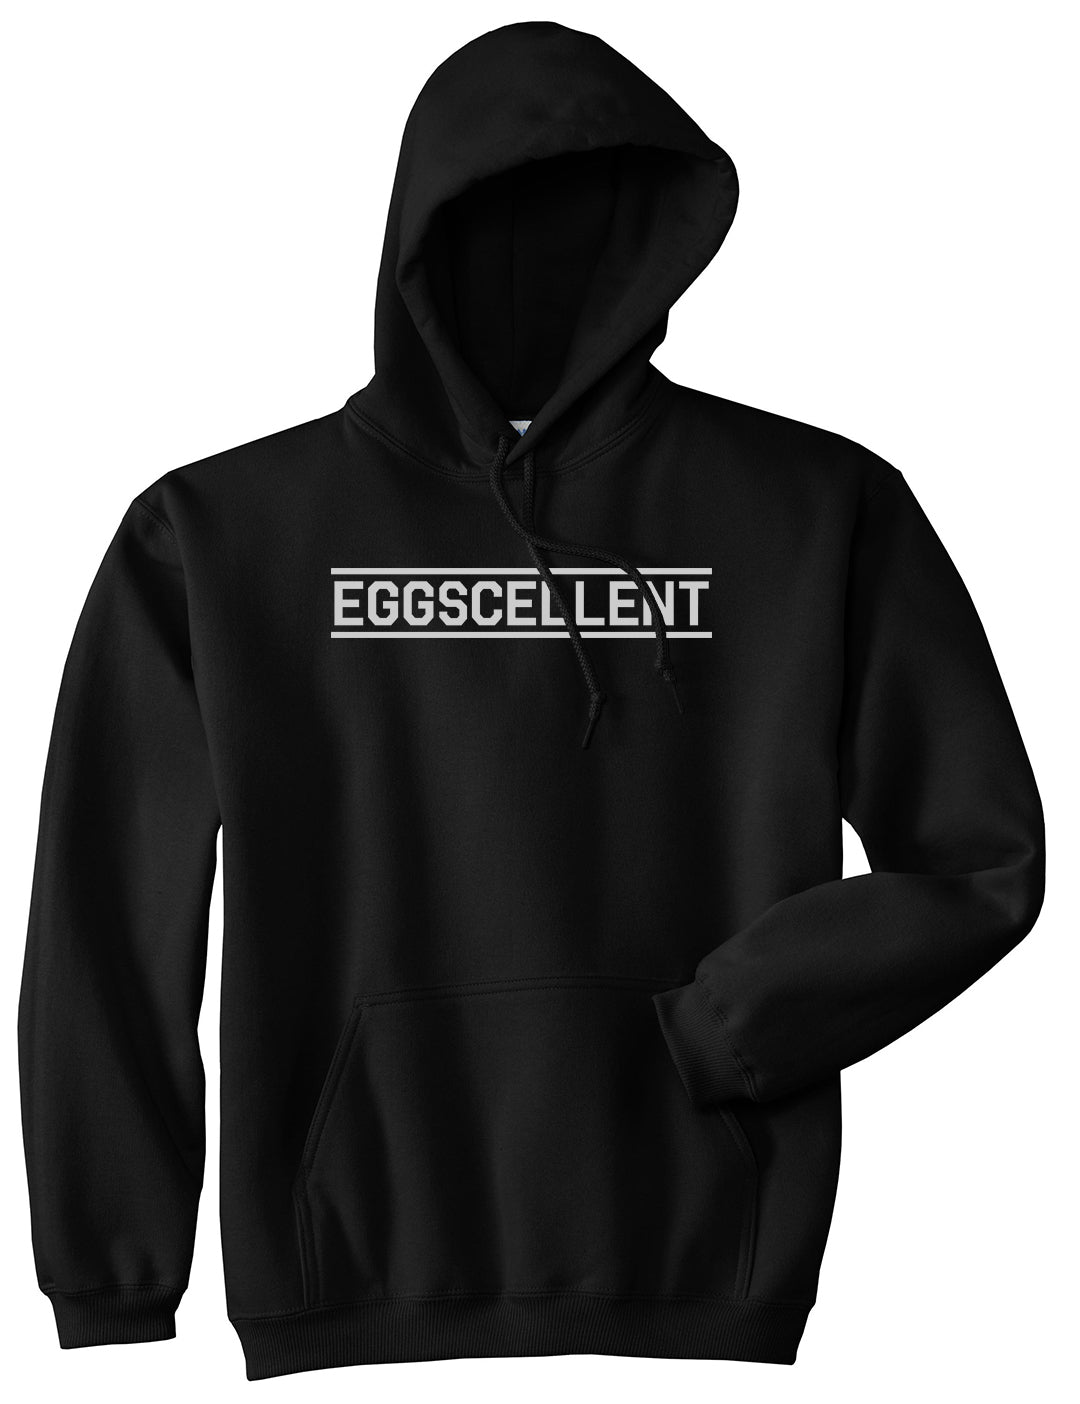 Eggscellent Funny Mens Black Pullover Hoodie by Kings Of NY